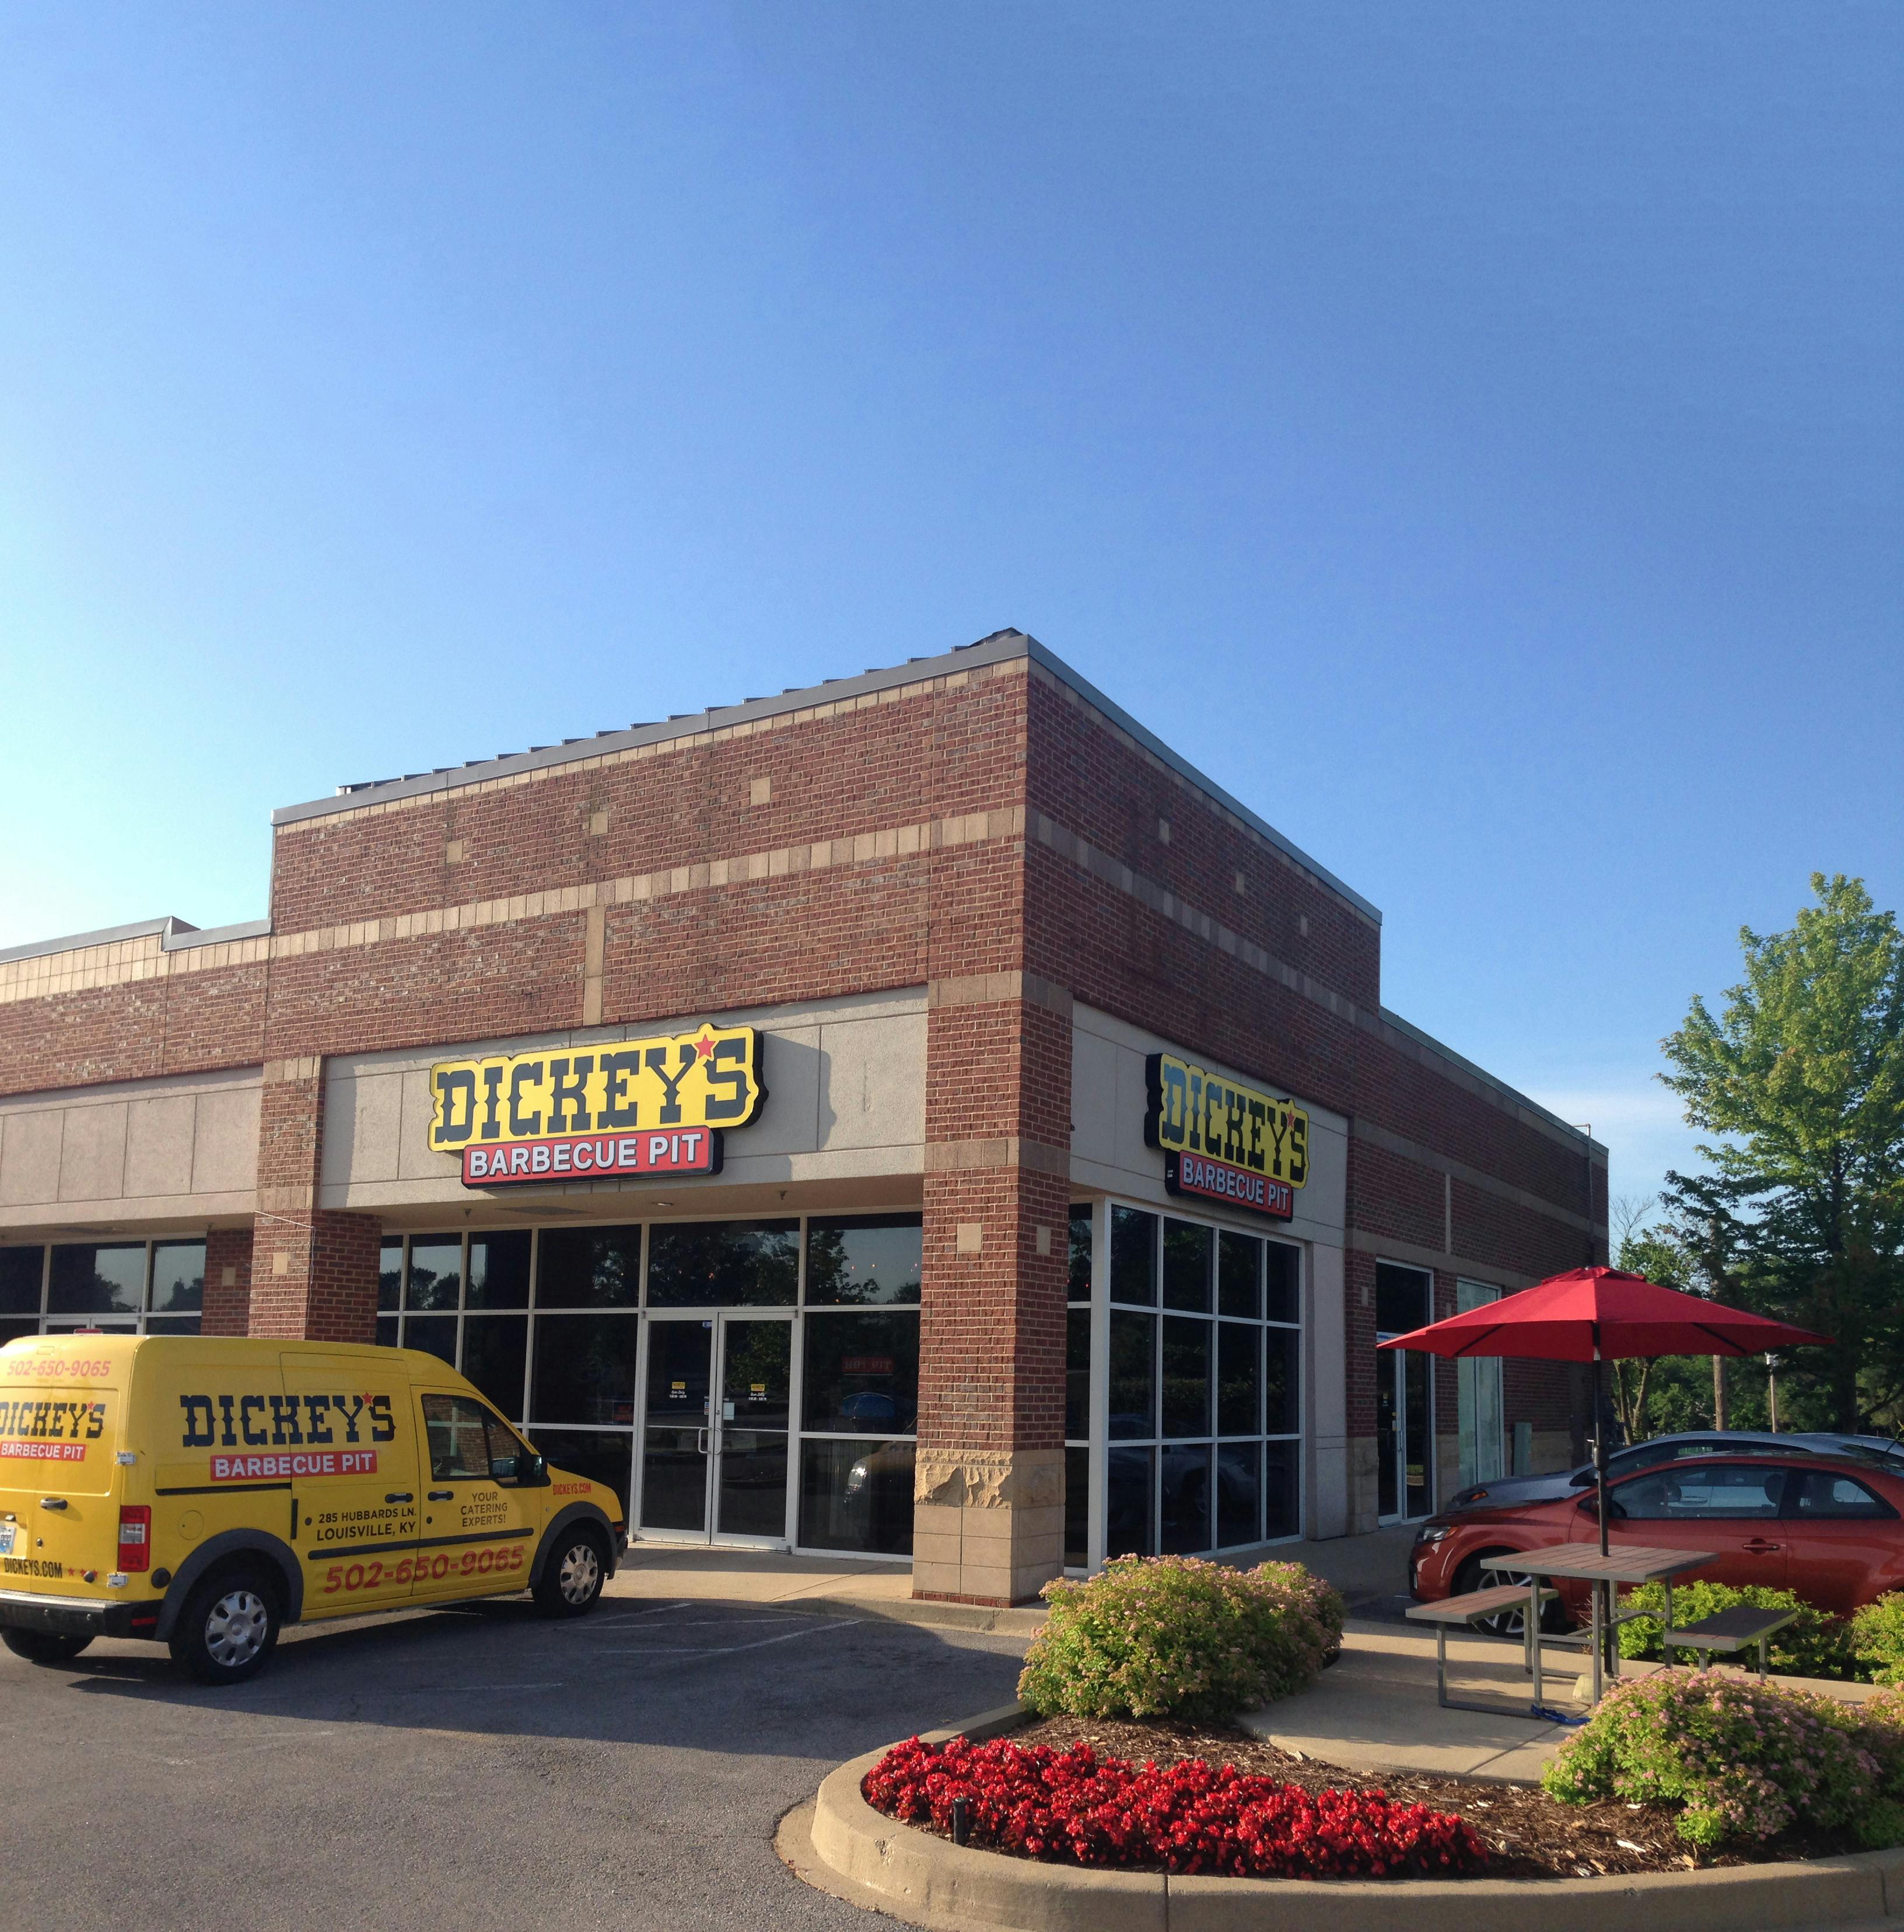 The Daily Meal: Gold Standard Cleaning System Debuts at Dickey’s Barbecue Pit Locations Nationwide